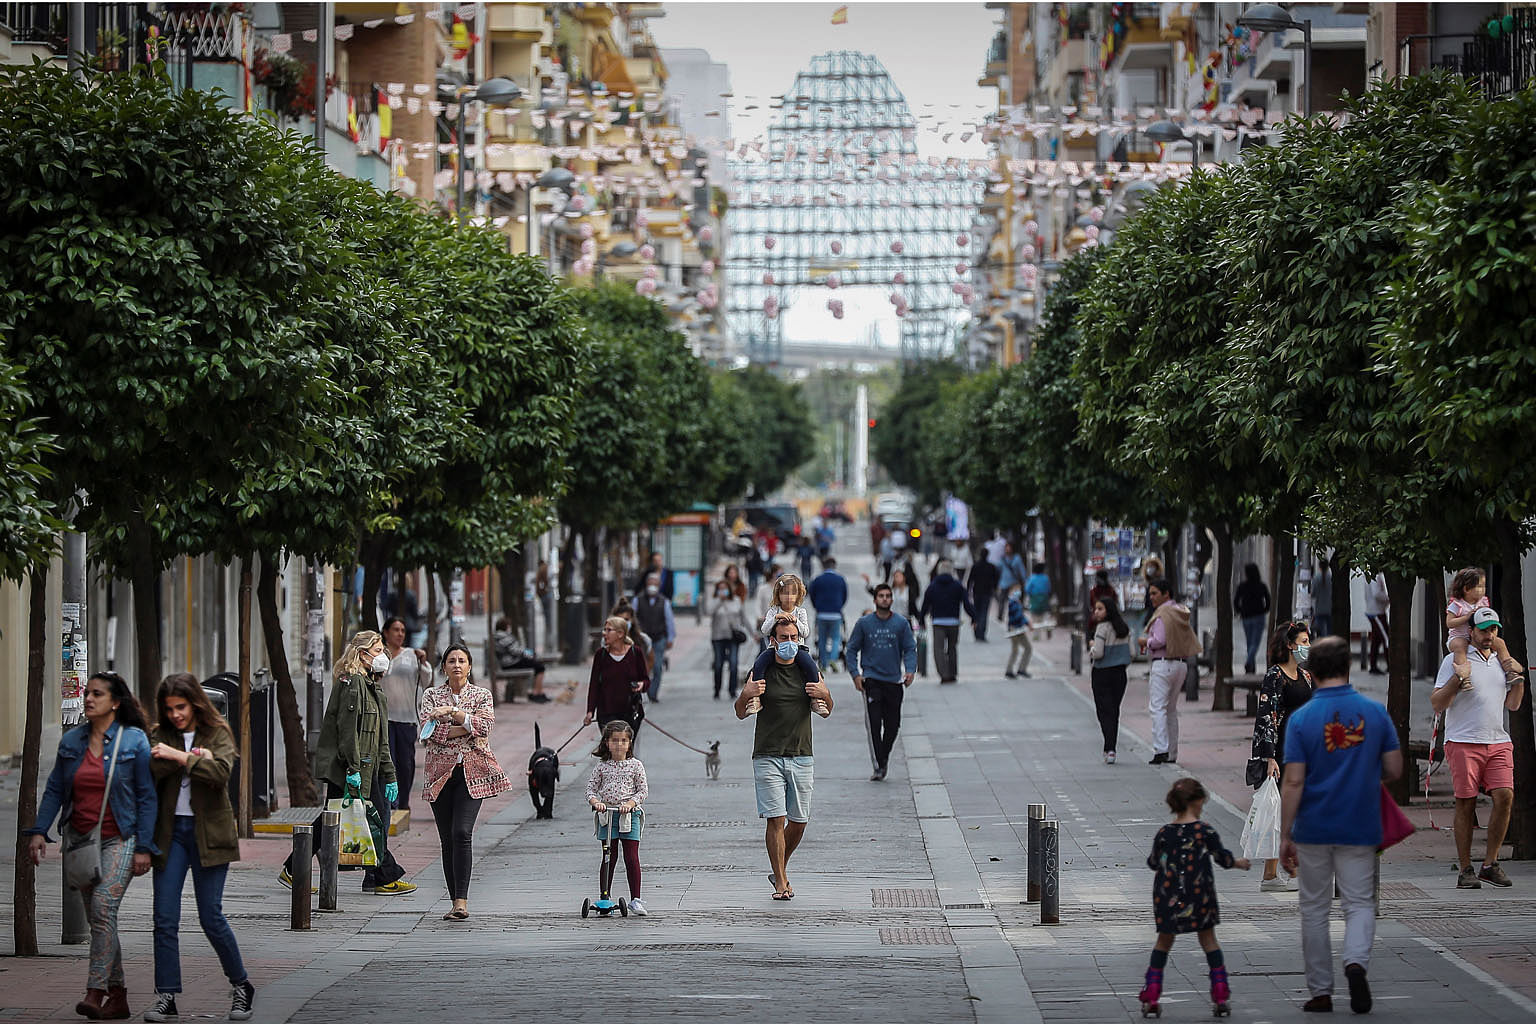 People walking down the San Jacinto street in the Spanish city of Sevilla on April 26, the first day minors were allowed an hour's walk per day since a lockdown was ordered in March. The writer says that amid the Covid-19 pandemic, ''faith is being tested